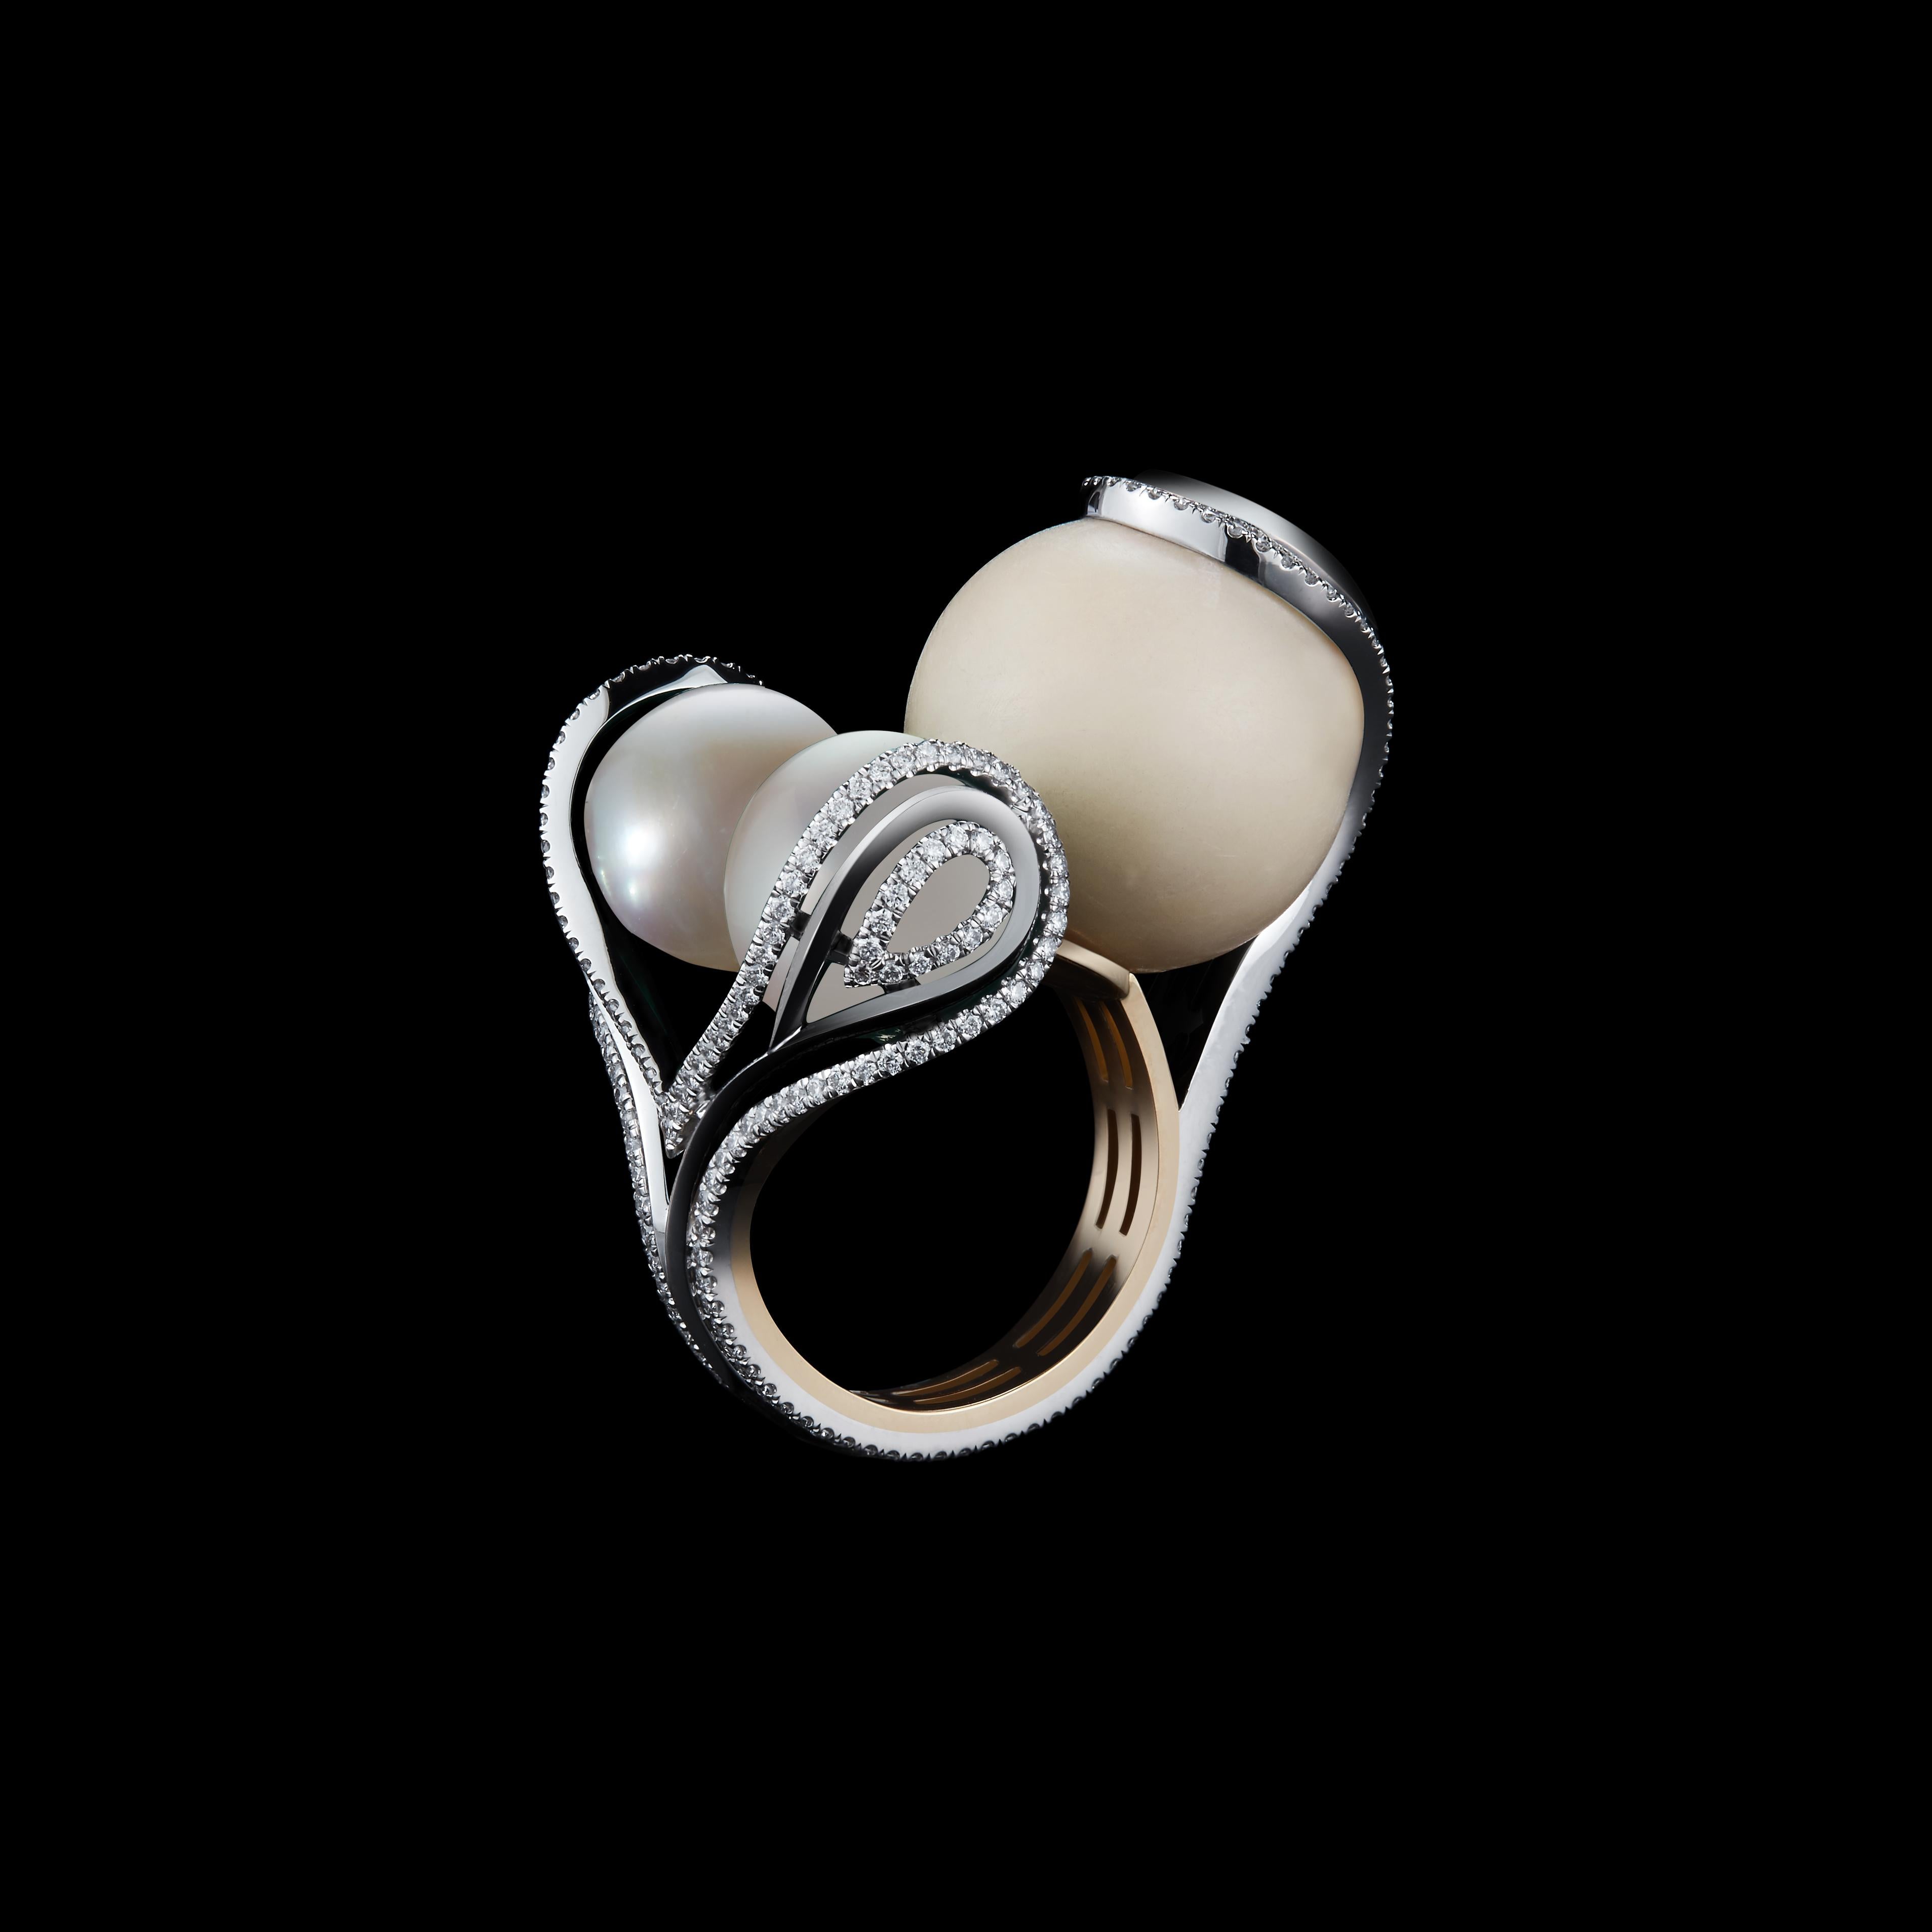 An Alexandra Mor One-Of-a-Kind Sphere Ring set with a pair of south sea pearls measuring 15 mm,  16.80 carat wild Tagua- Seed Bead. Platinum set on 18KY Gold Alexandra Mor logo gallery with Alexandra Mor's signature Feather design of 1mm kinfe-edged